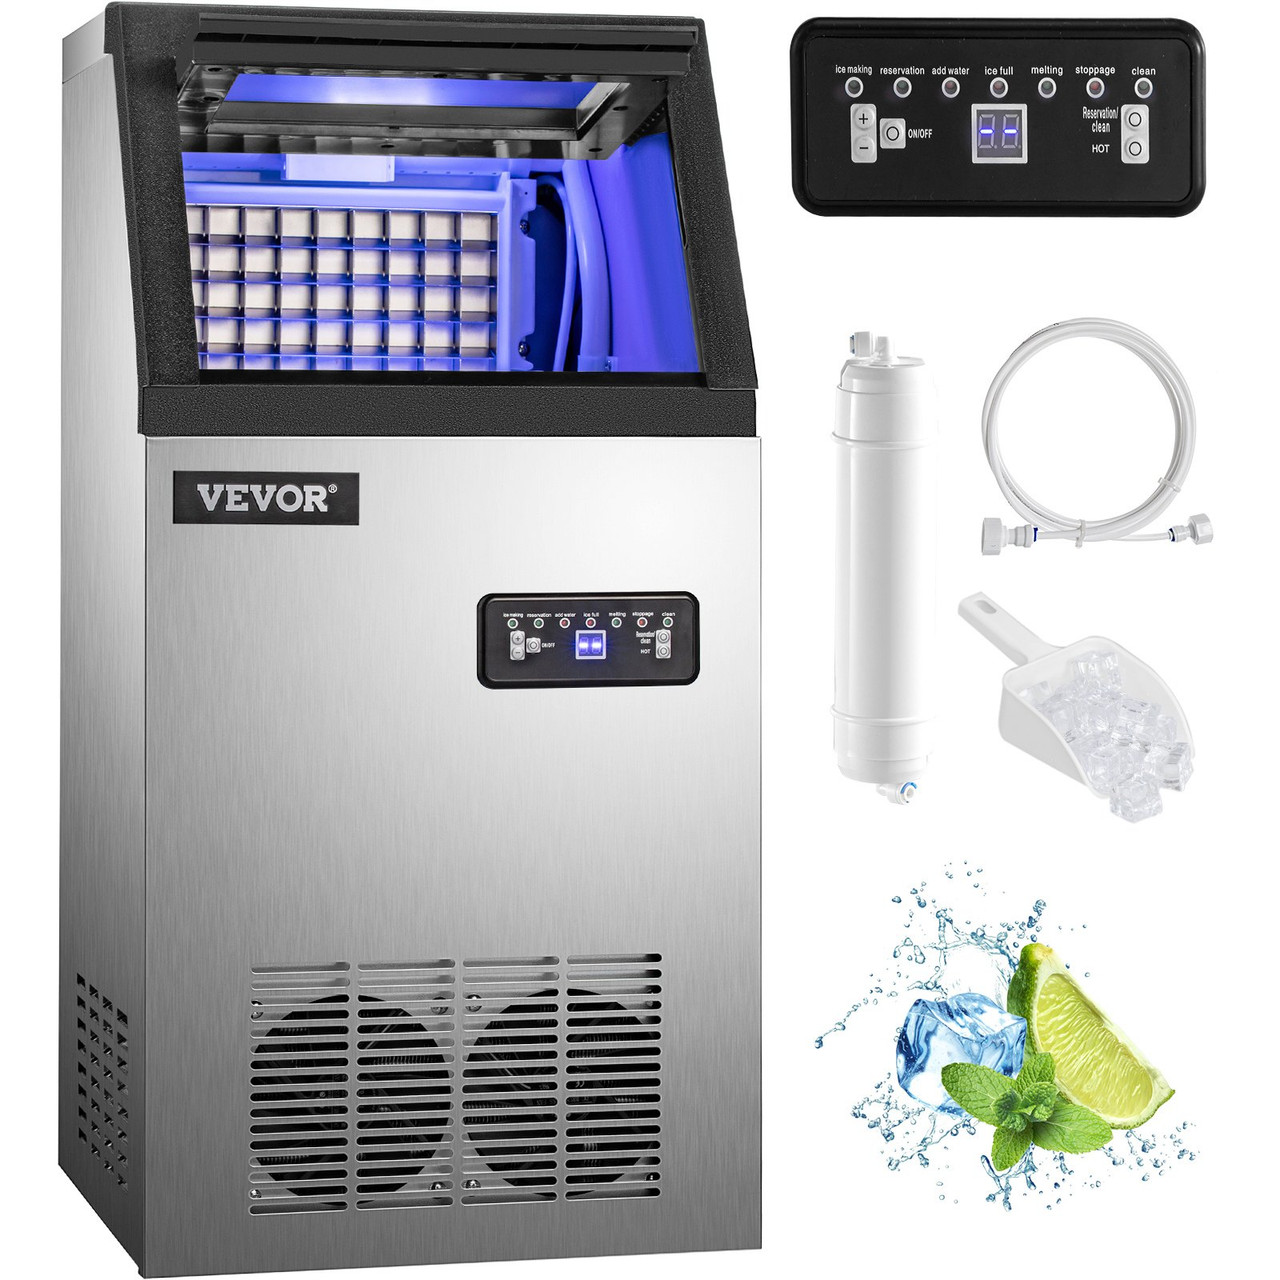 110V Commercial Ice Maker 110LBS/24H with 22LBs Storage Ice Maker Machine Stainless Steel Portable Automatic Ice Machine with Scoop and Connection Hoses Perfect for Restaurants Bars Cafe